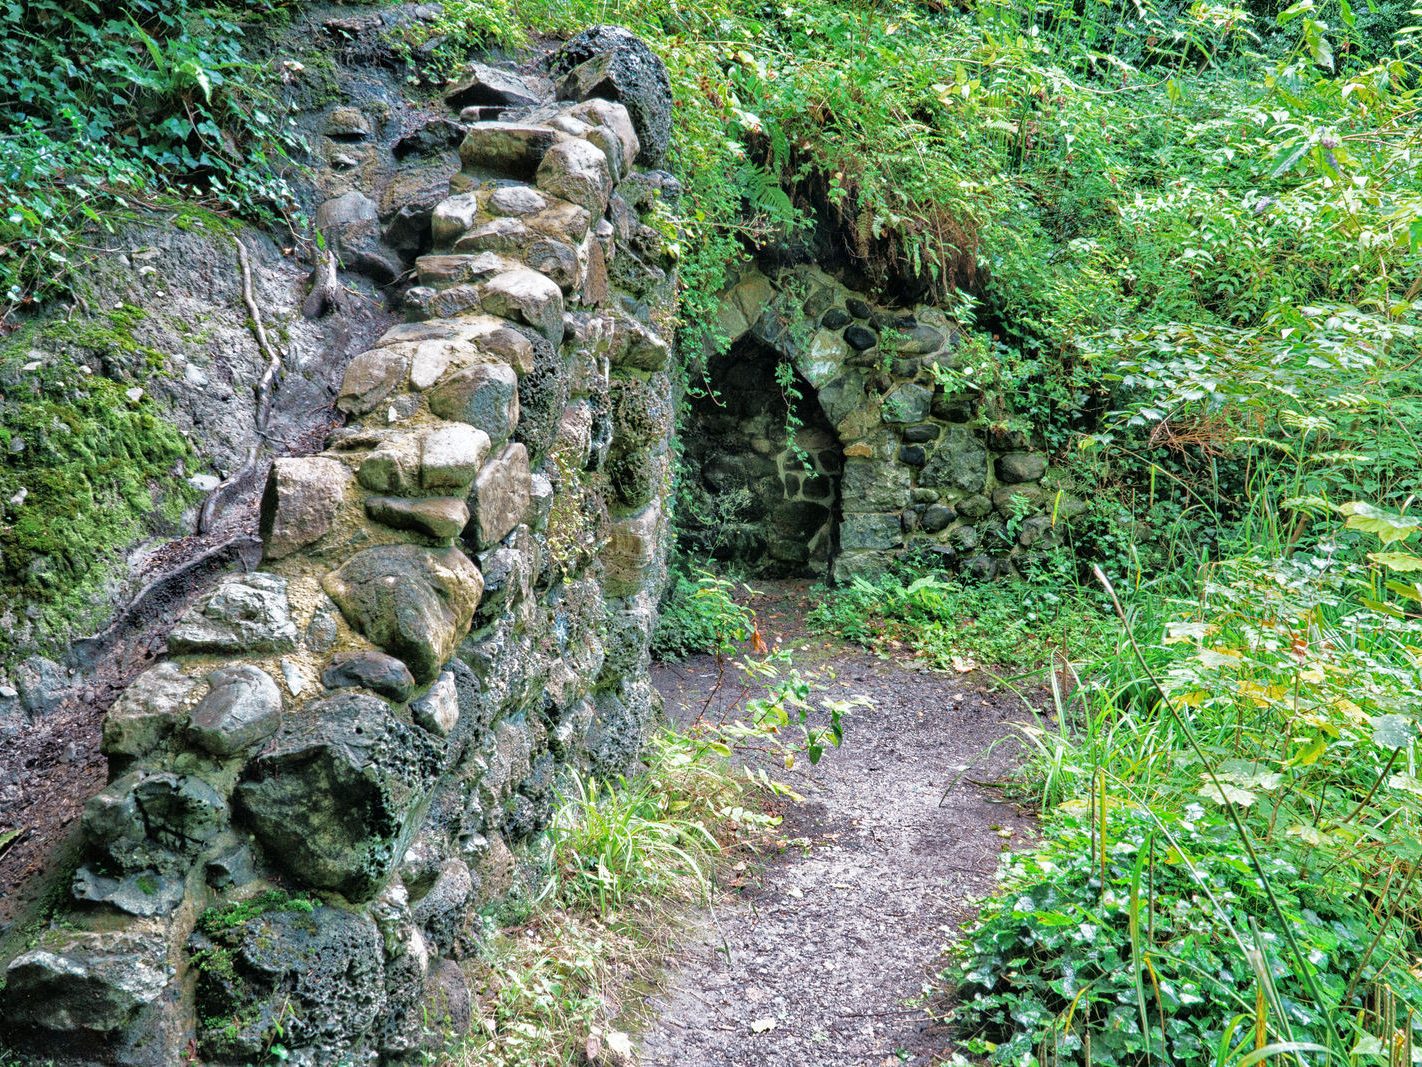 THE HERMIT'S CAVE AND NEARBY [ST ANNE'S PARK IN RAHENY] 011